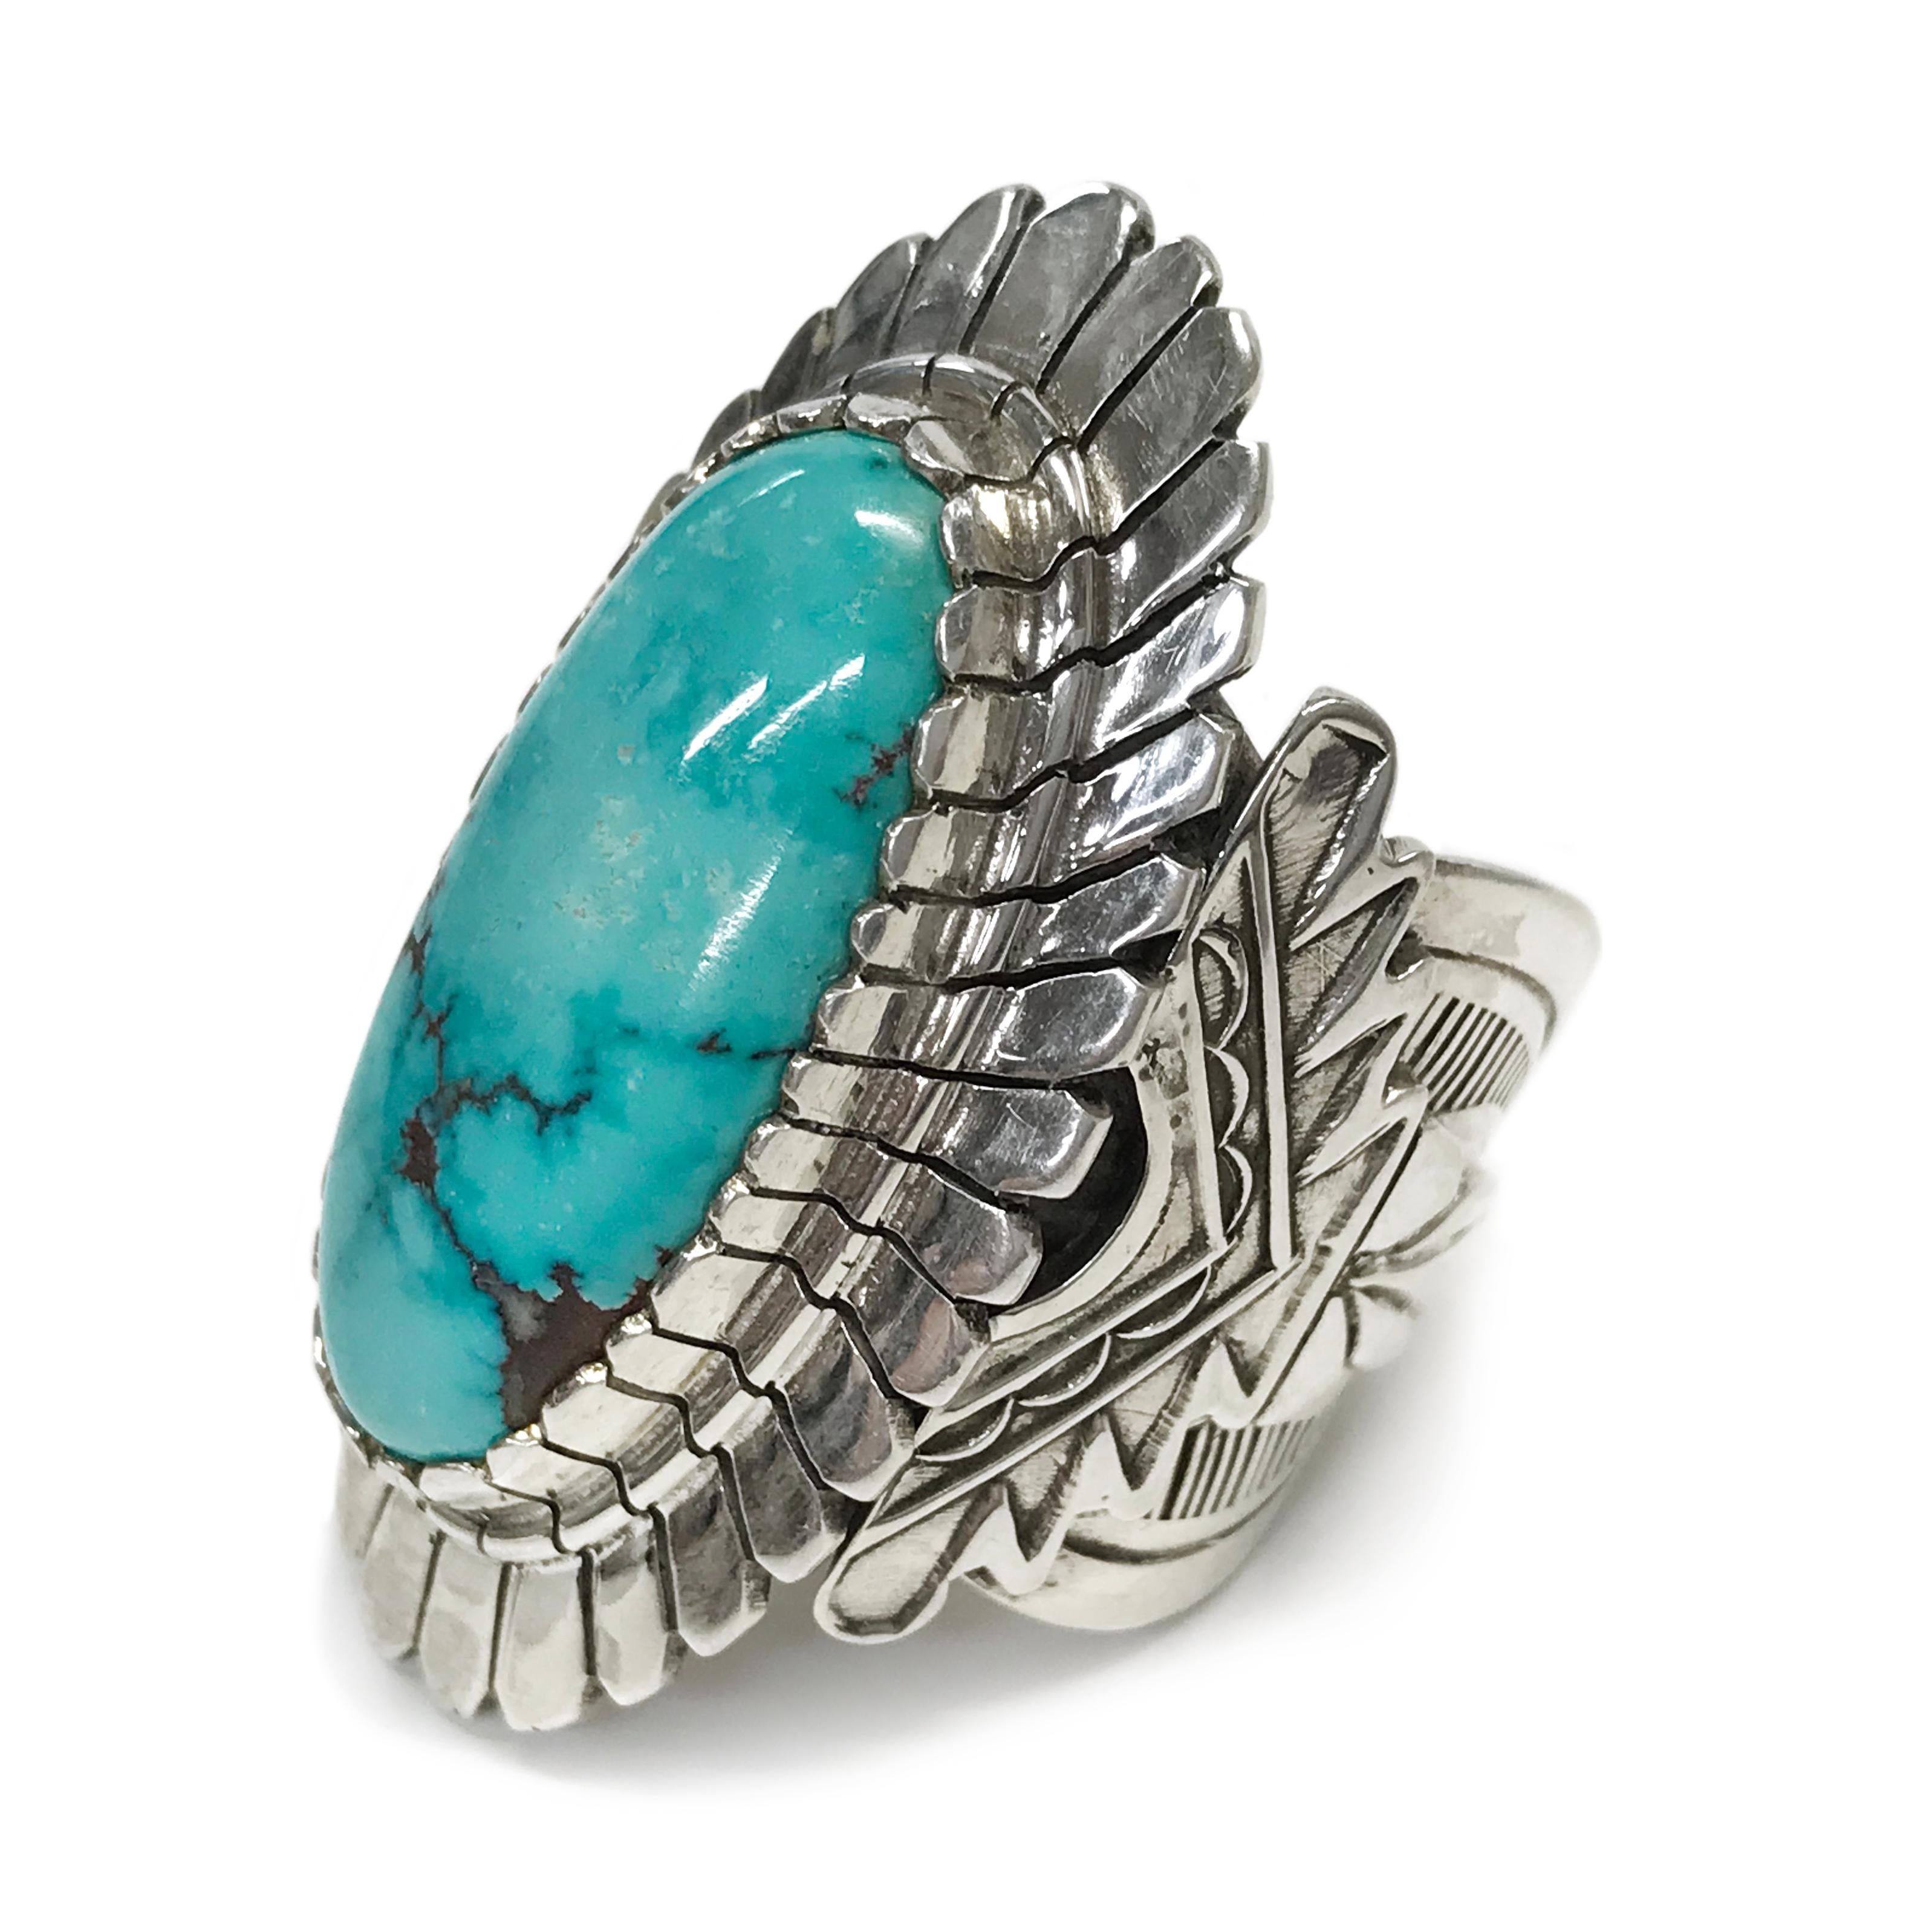 Handcrafted from Sterling Silver by jewelry maker, Ray Winner. This stunning ring features a large oval Carico Lake Turquoise cabochon set in a gorgeous wide Native American-inspired design band and bezel. The ring measures 23mm high x 24mm wide x